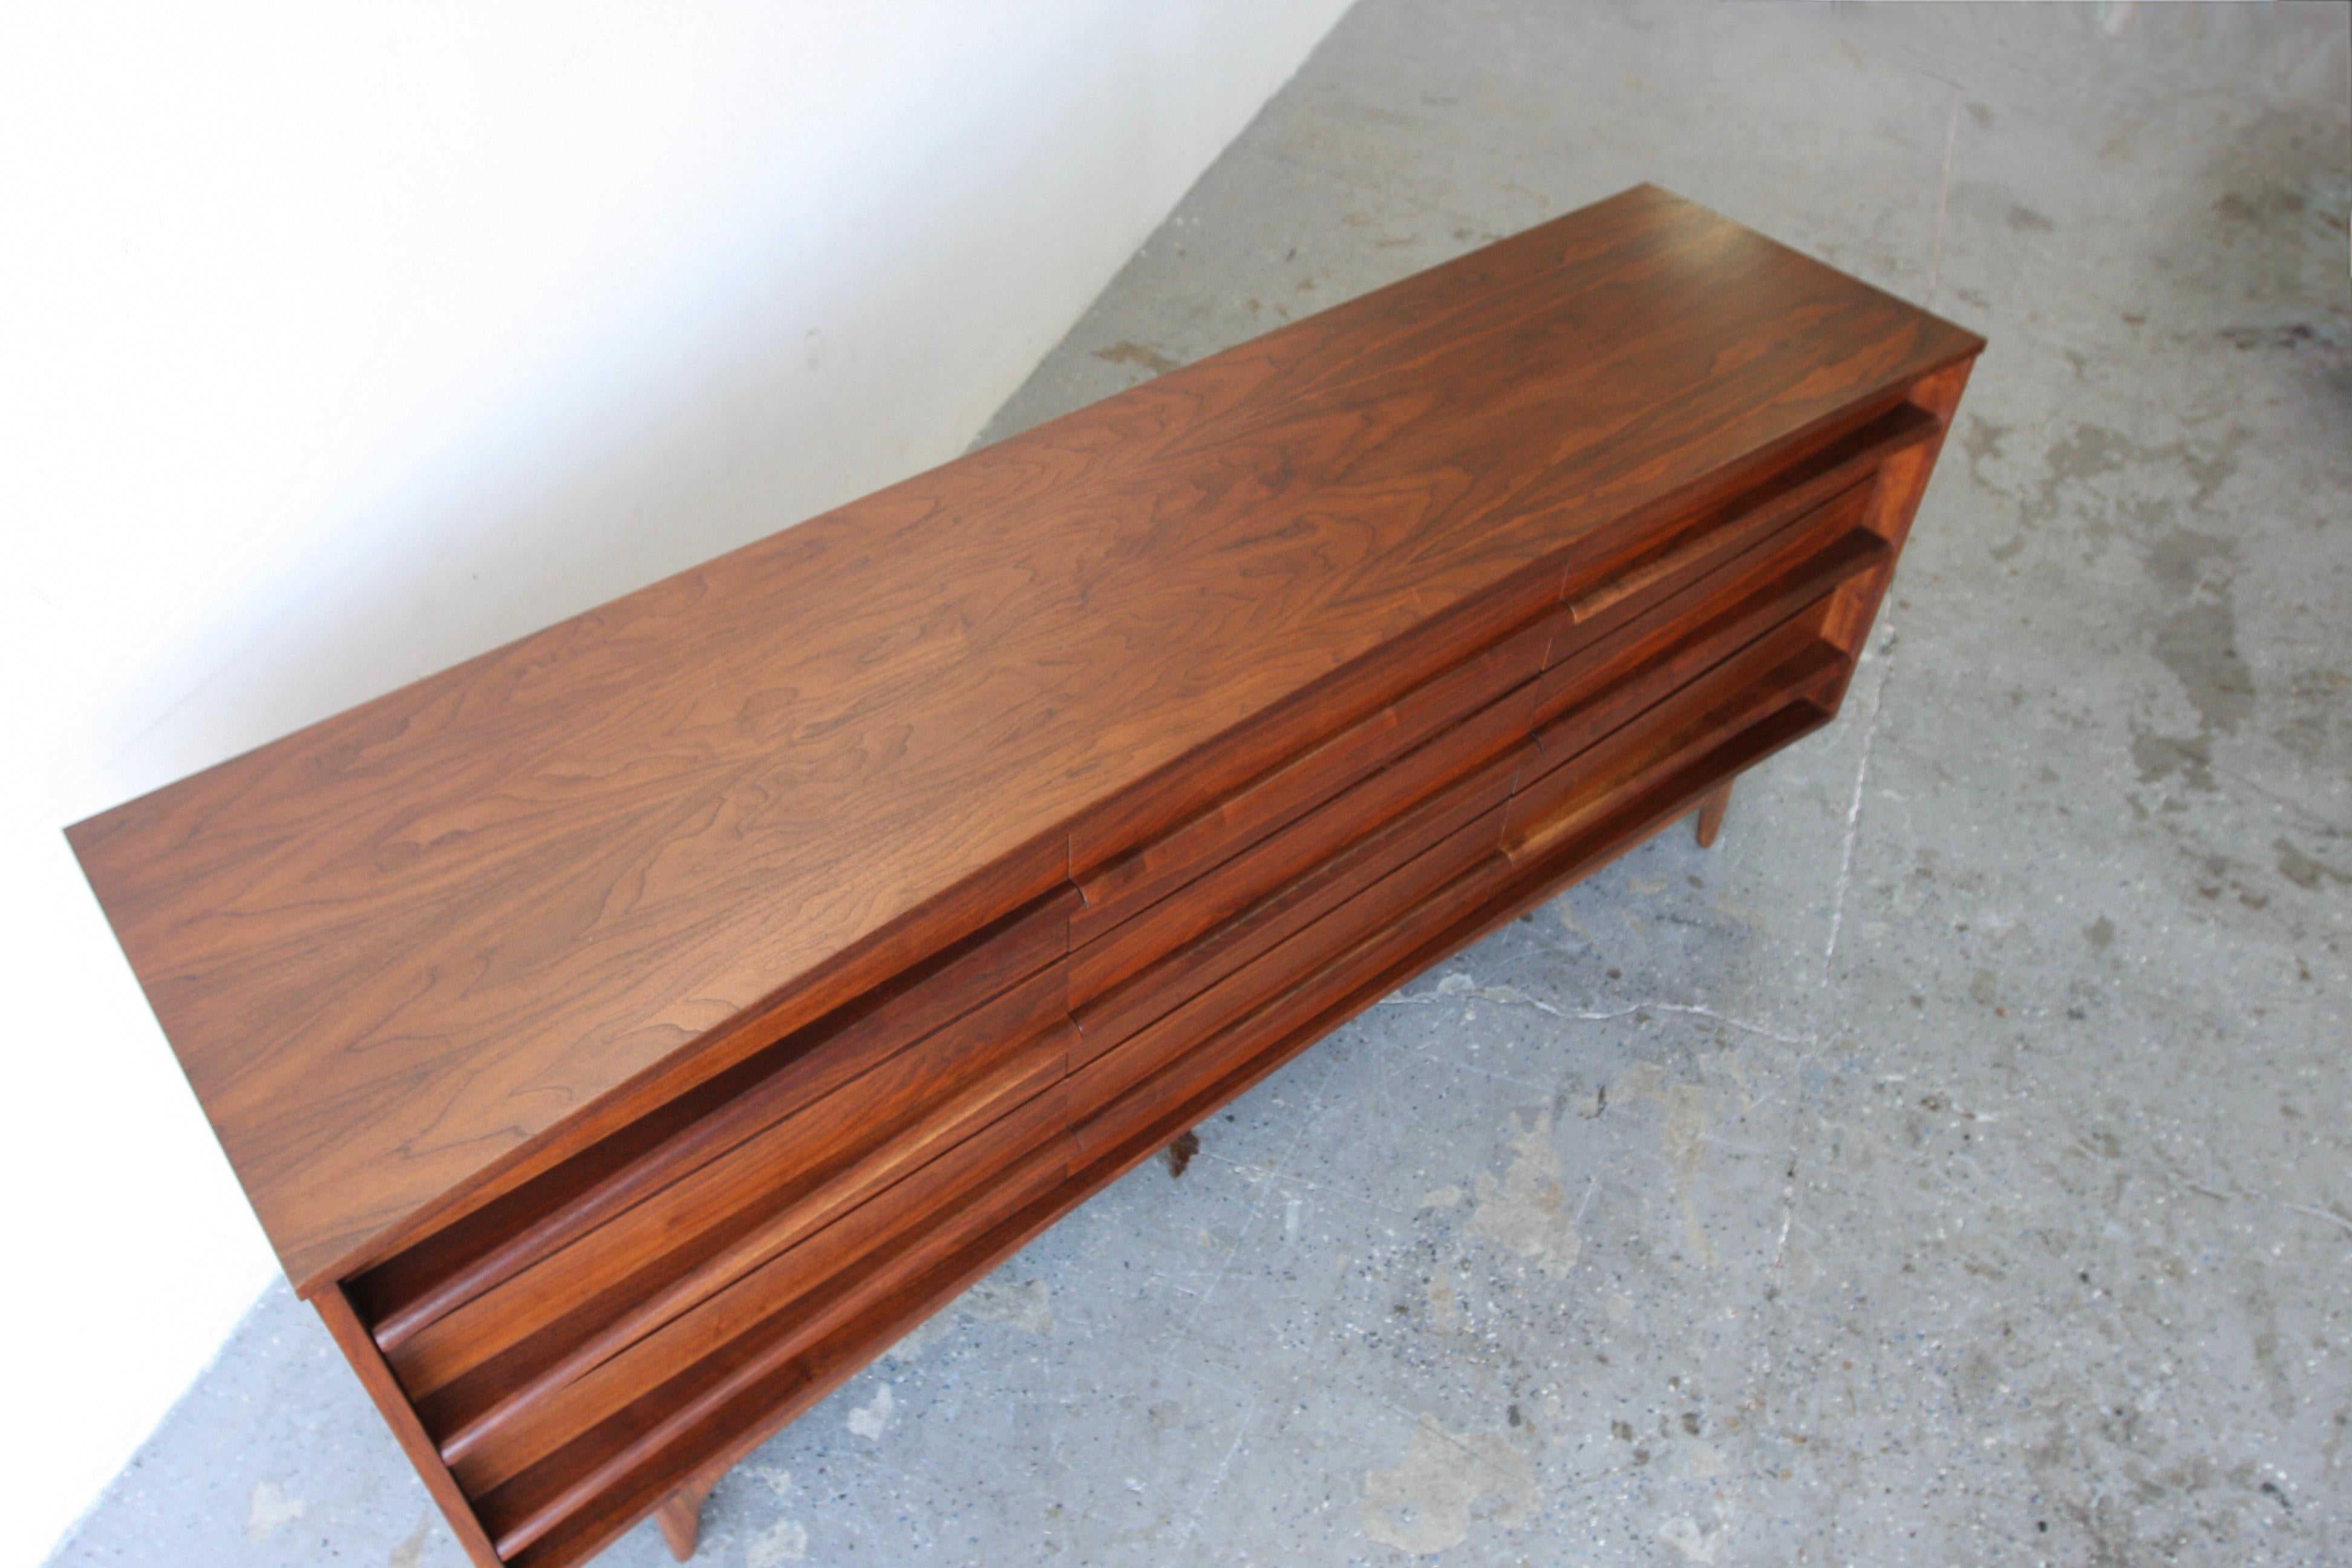 Young Manufacturing Mid Century Walnut Curved Lowboy 9 Drawer Dresser

Sculpted walnut pulls extend the full length of the credenza, tapering in the middle and expanding again towards the end, creating a sense of unity throughout the piece. The body